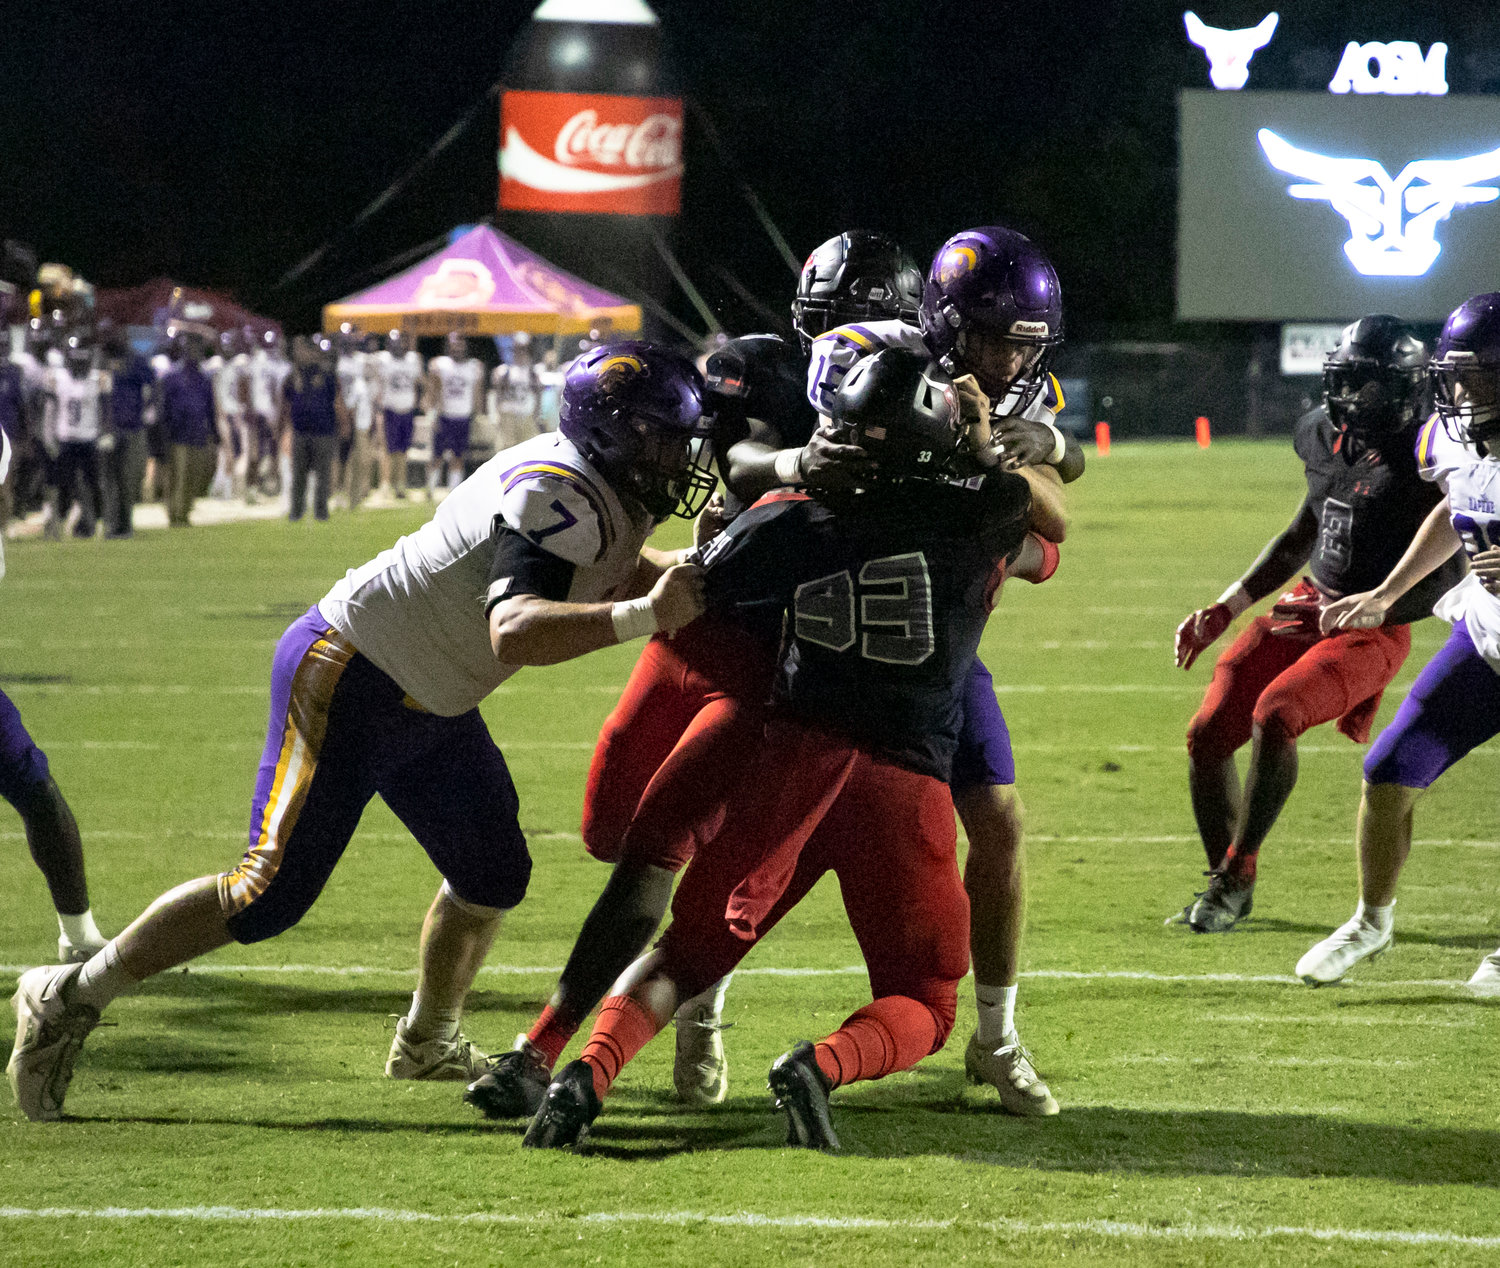 Toro senior Josiah Hixon converges with Daphne’s Baylor Beard on a two-point attempt in the second quarter of the non-region contest at Spanish Fort Stadium Friday, Sept. 23. The Toro defense came up with six third-down stops in the second half to help secure an 18-15, rivalry win.